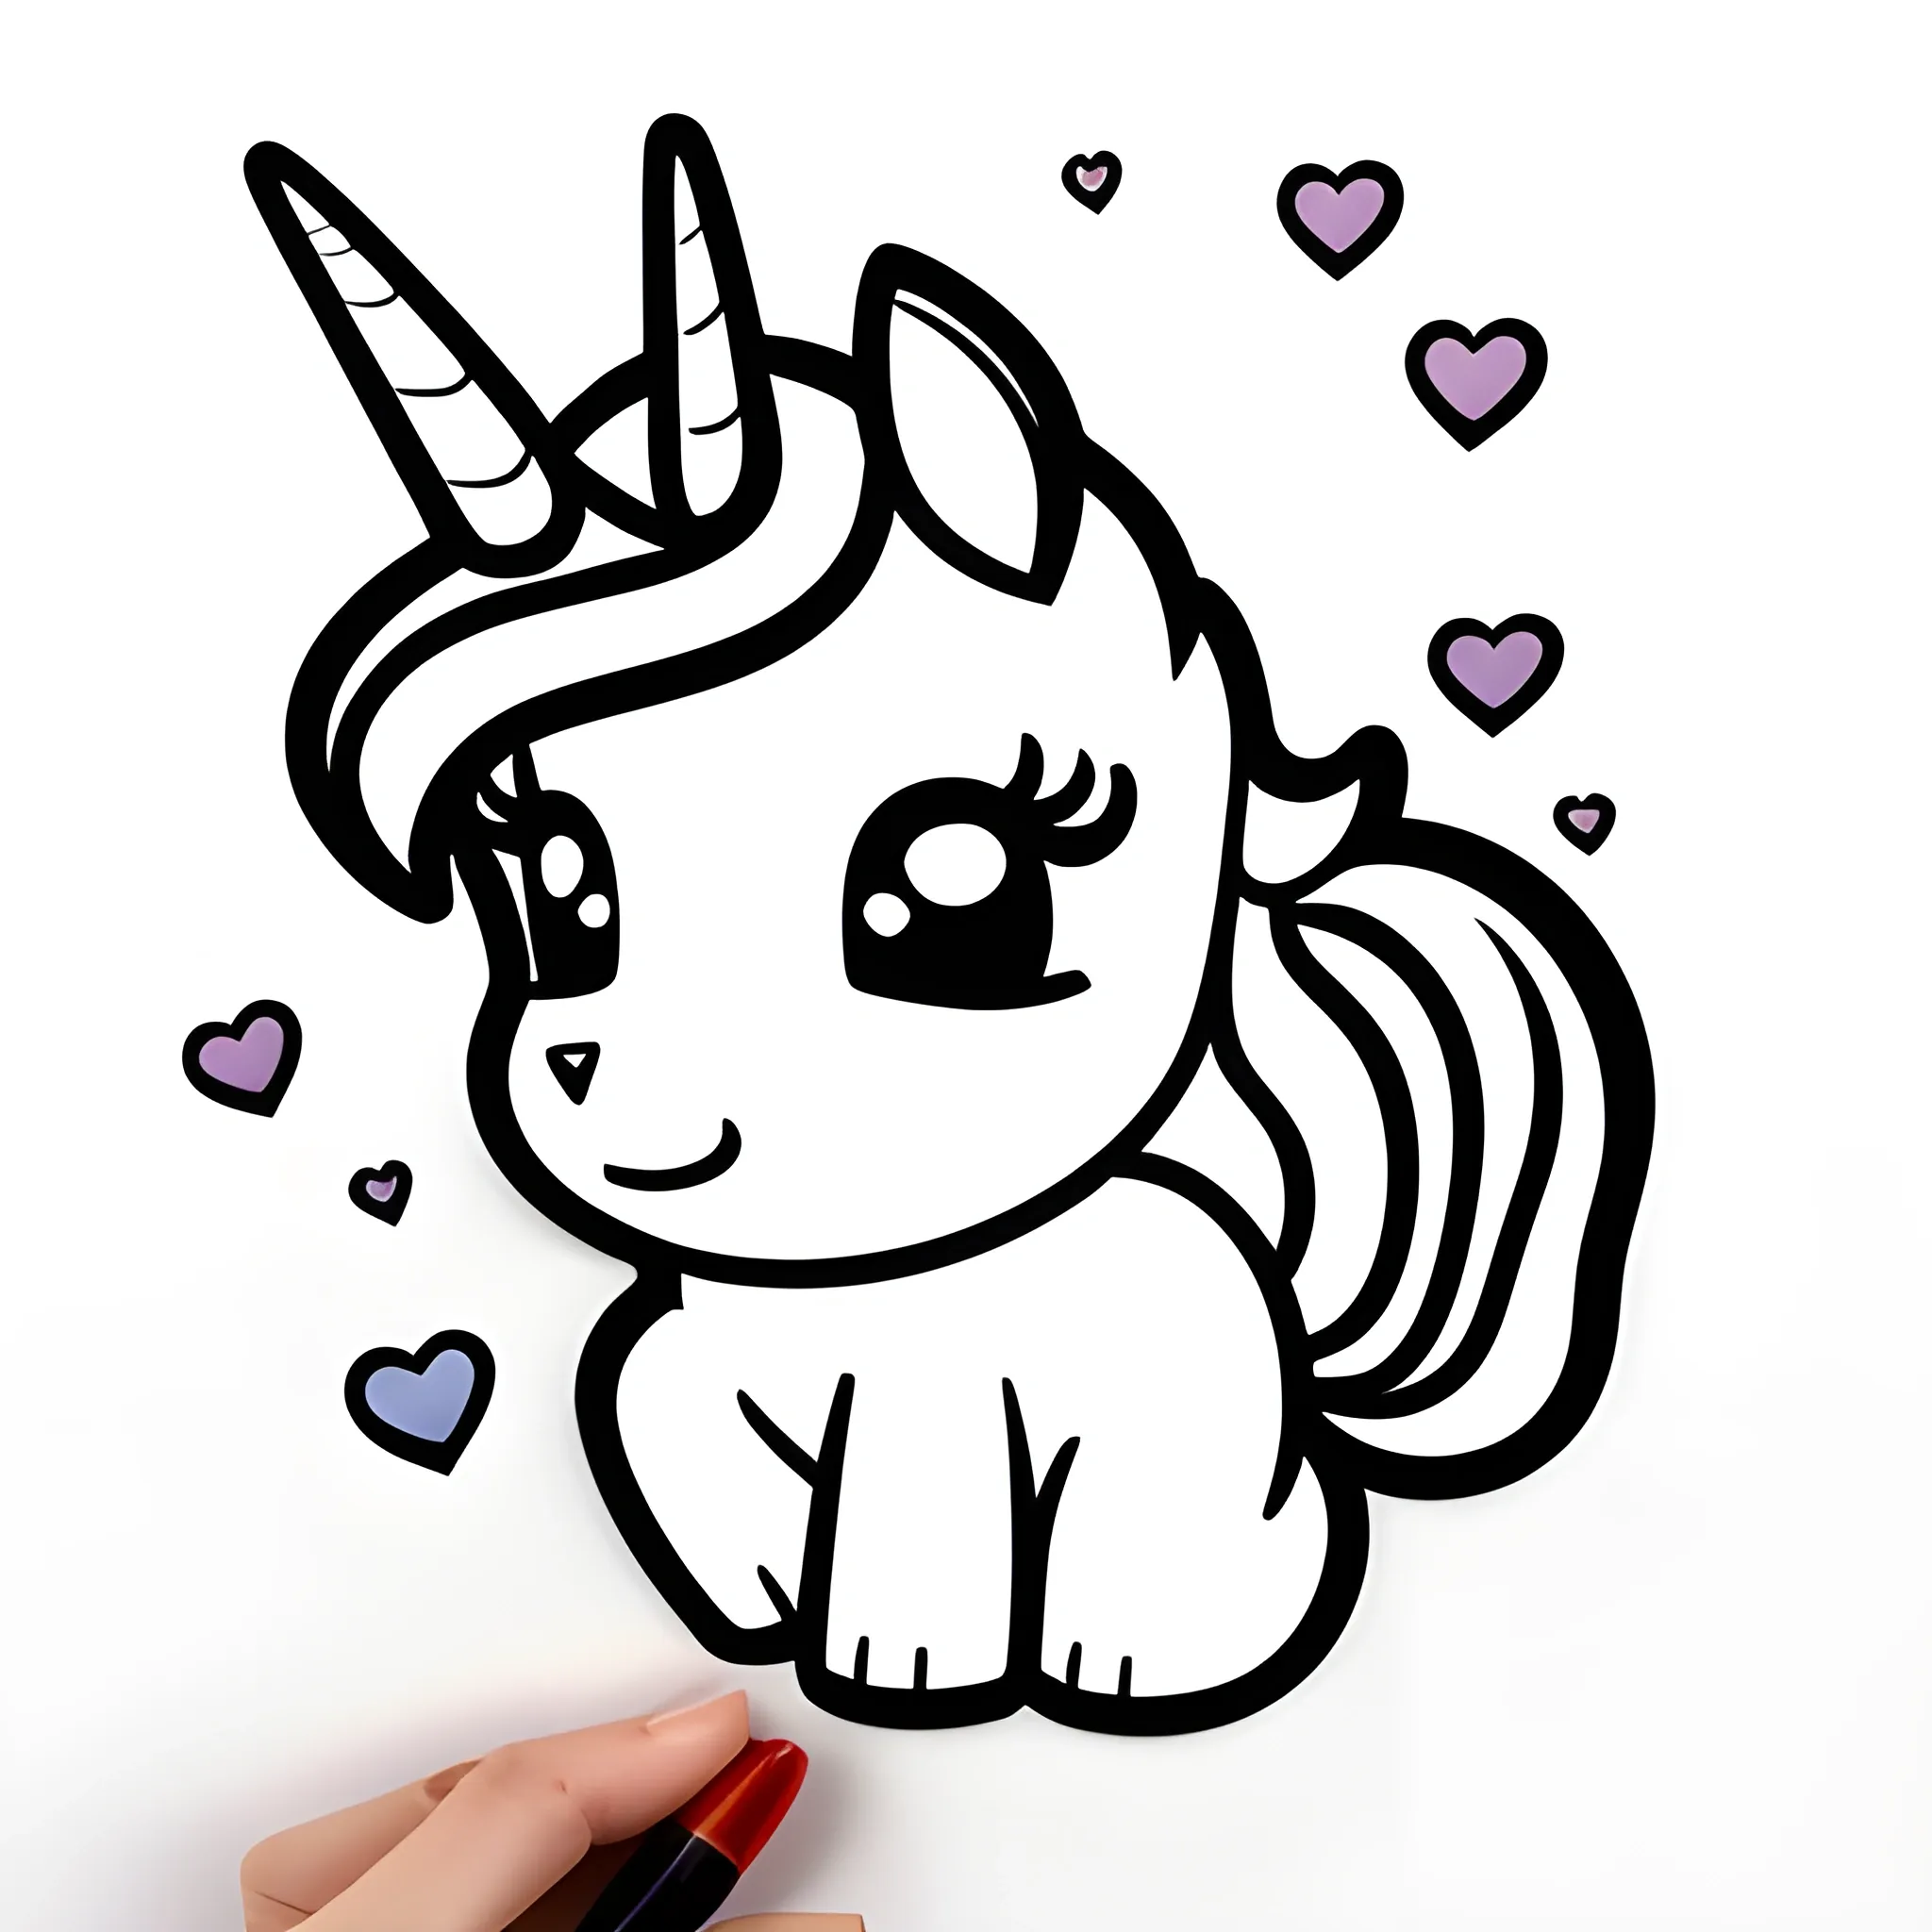 How to draw Unicorn Cloud Easy drawings | Unicorn drawing, Easy drawings,  Easy cartoon drawings